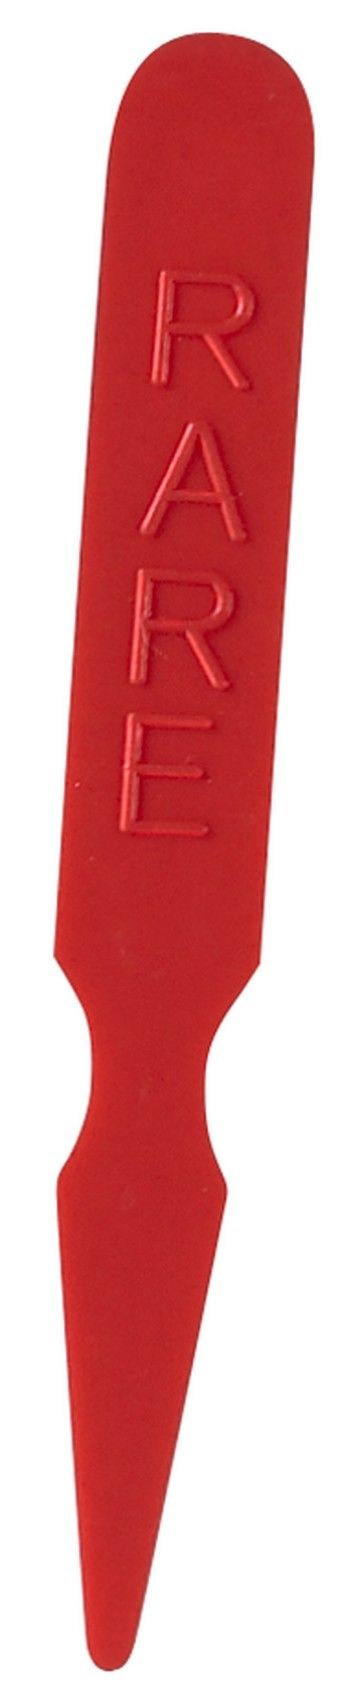 Winco PSM-R Steak Markers, Rare, Red, 1000/Bag